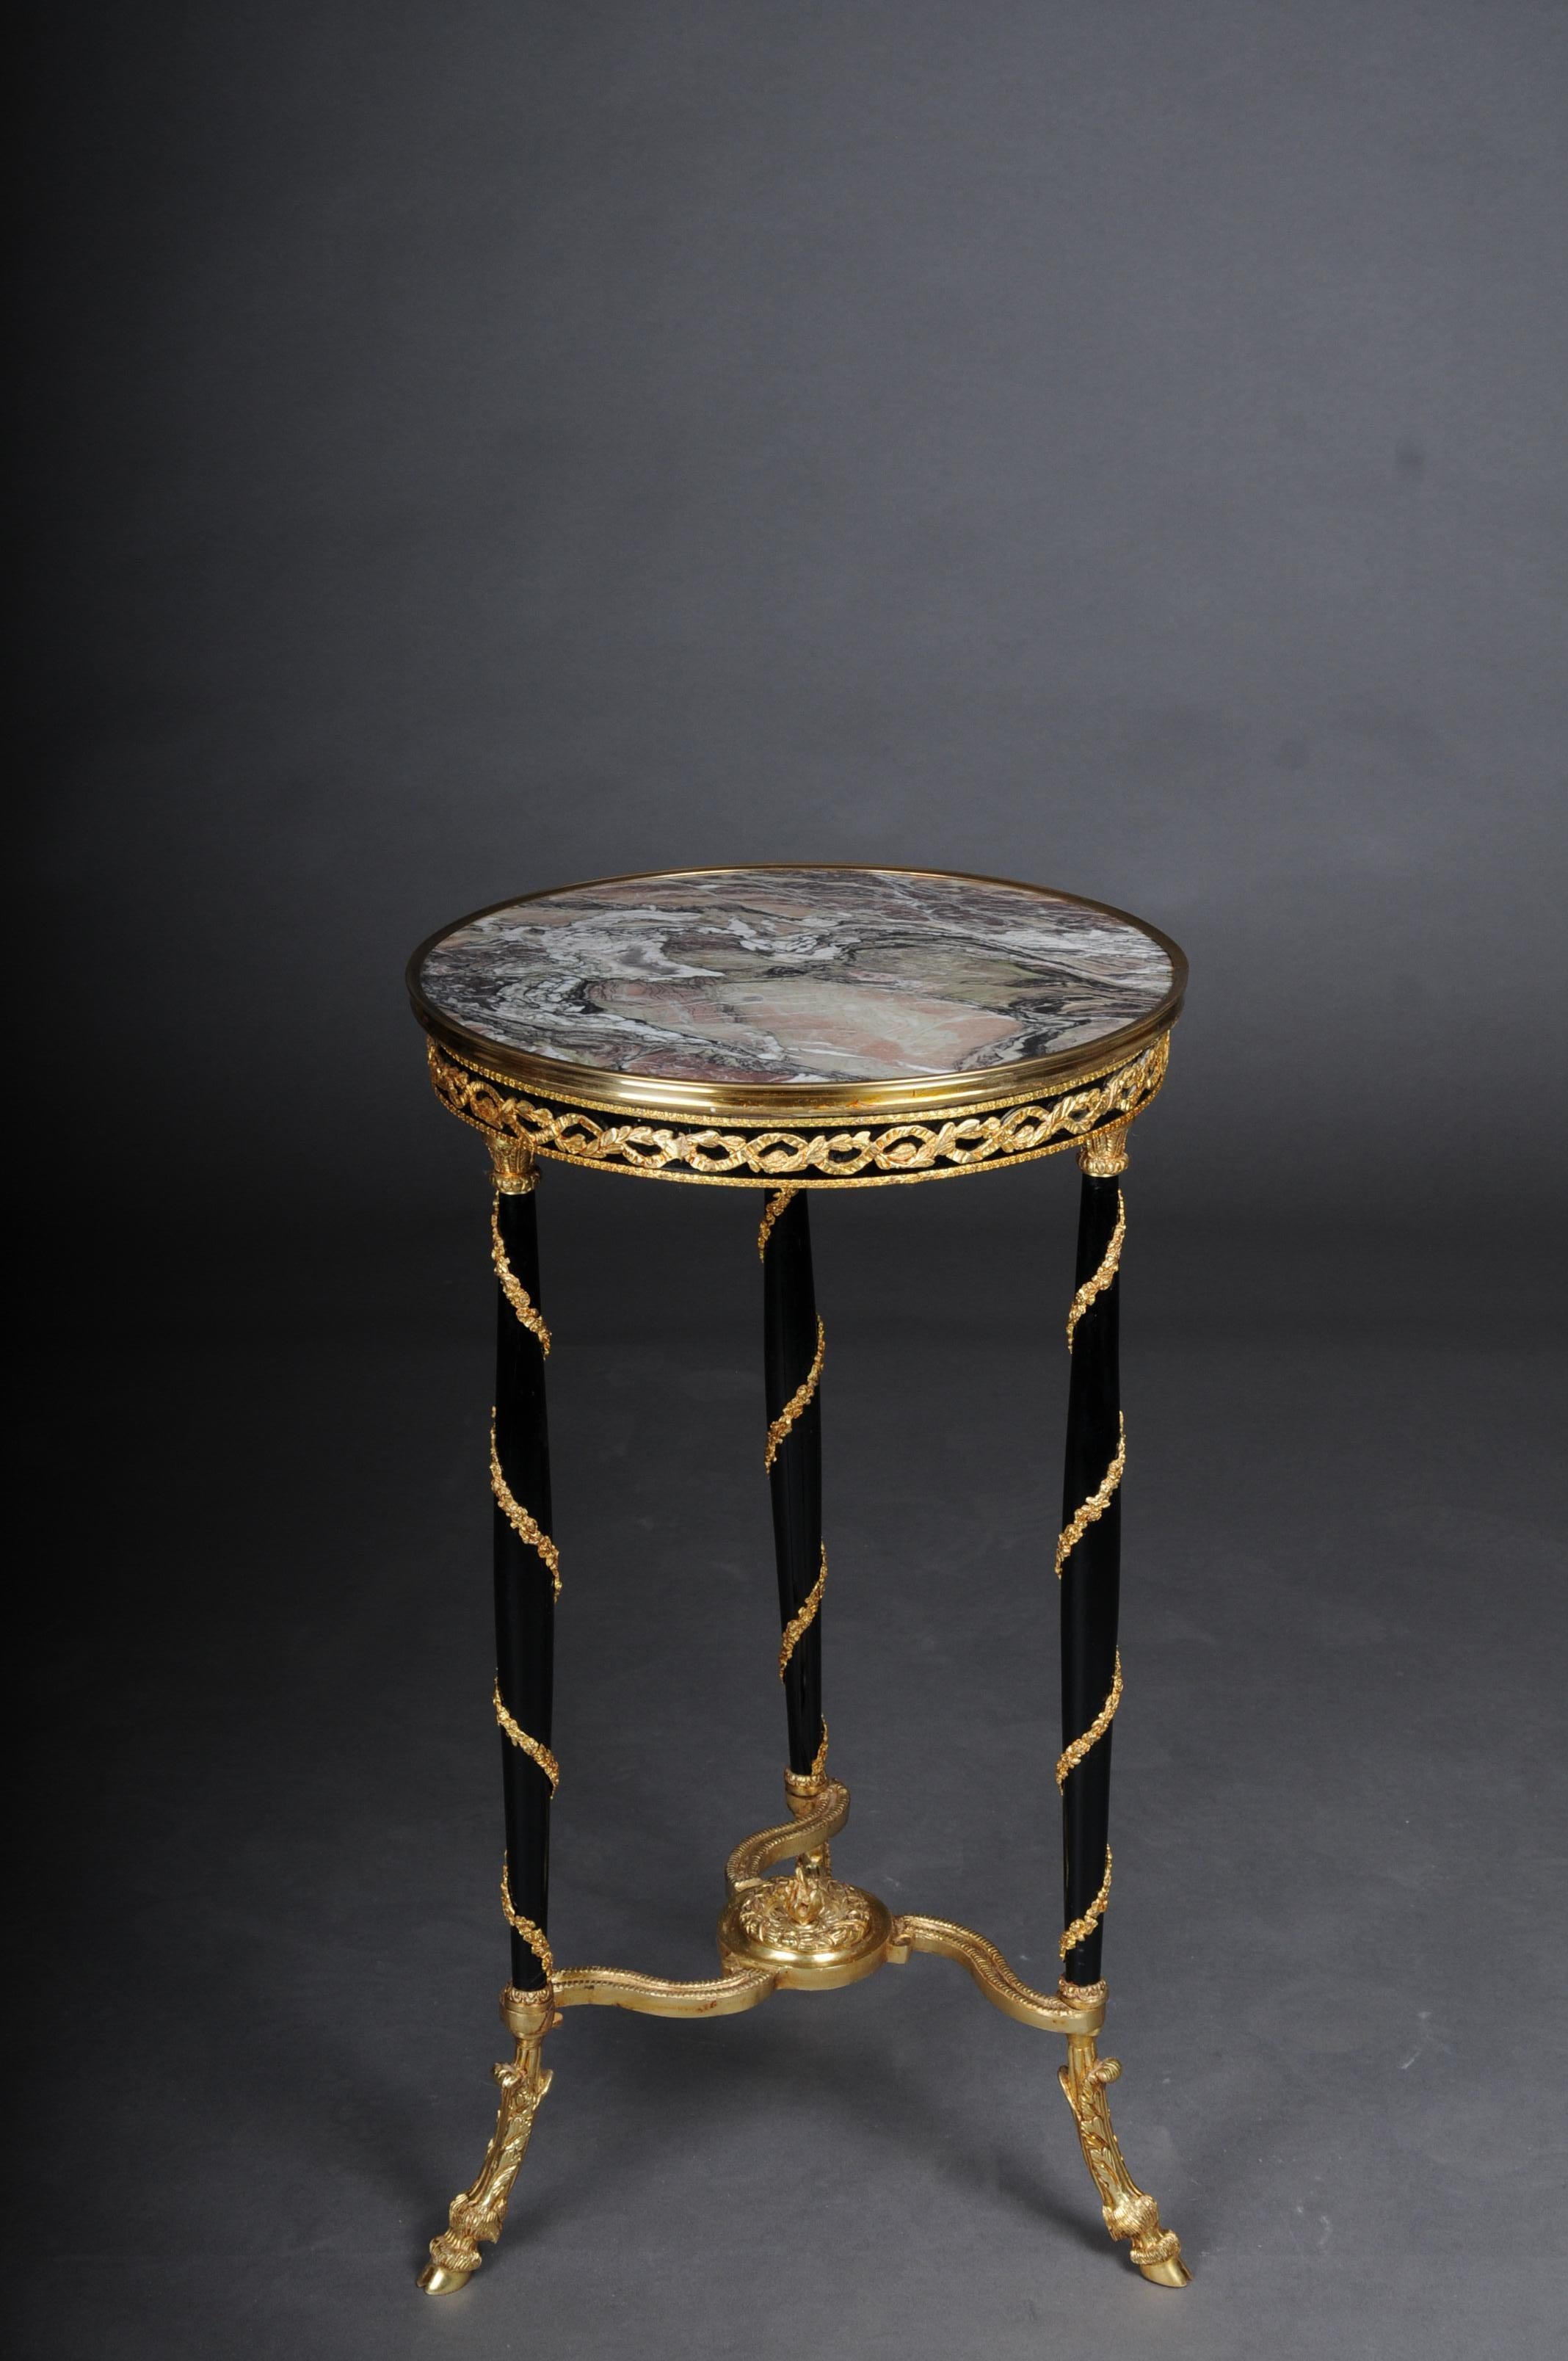 Ebonized 20th Century Majestic Empire Side Table/Gueridon, Marble, Round, Adam Weisweiler For Sale